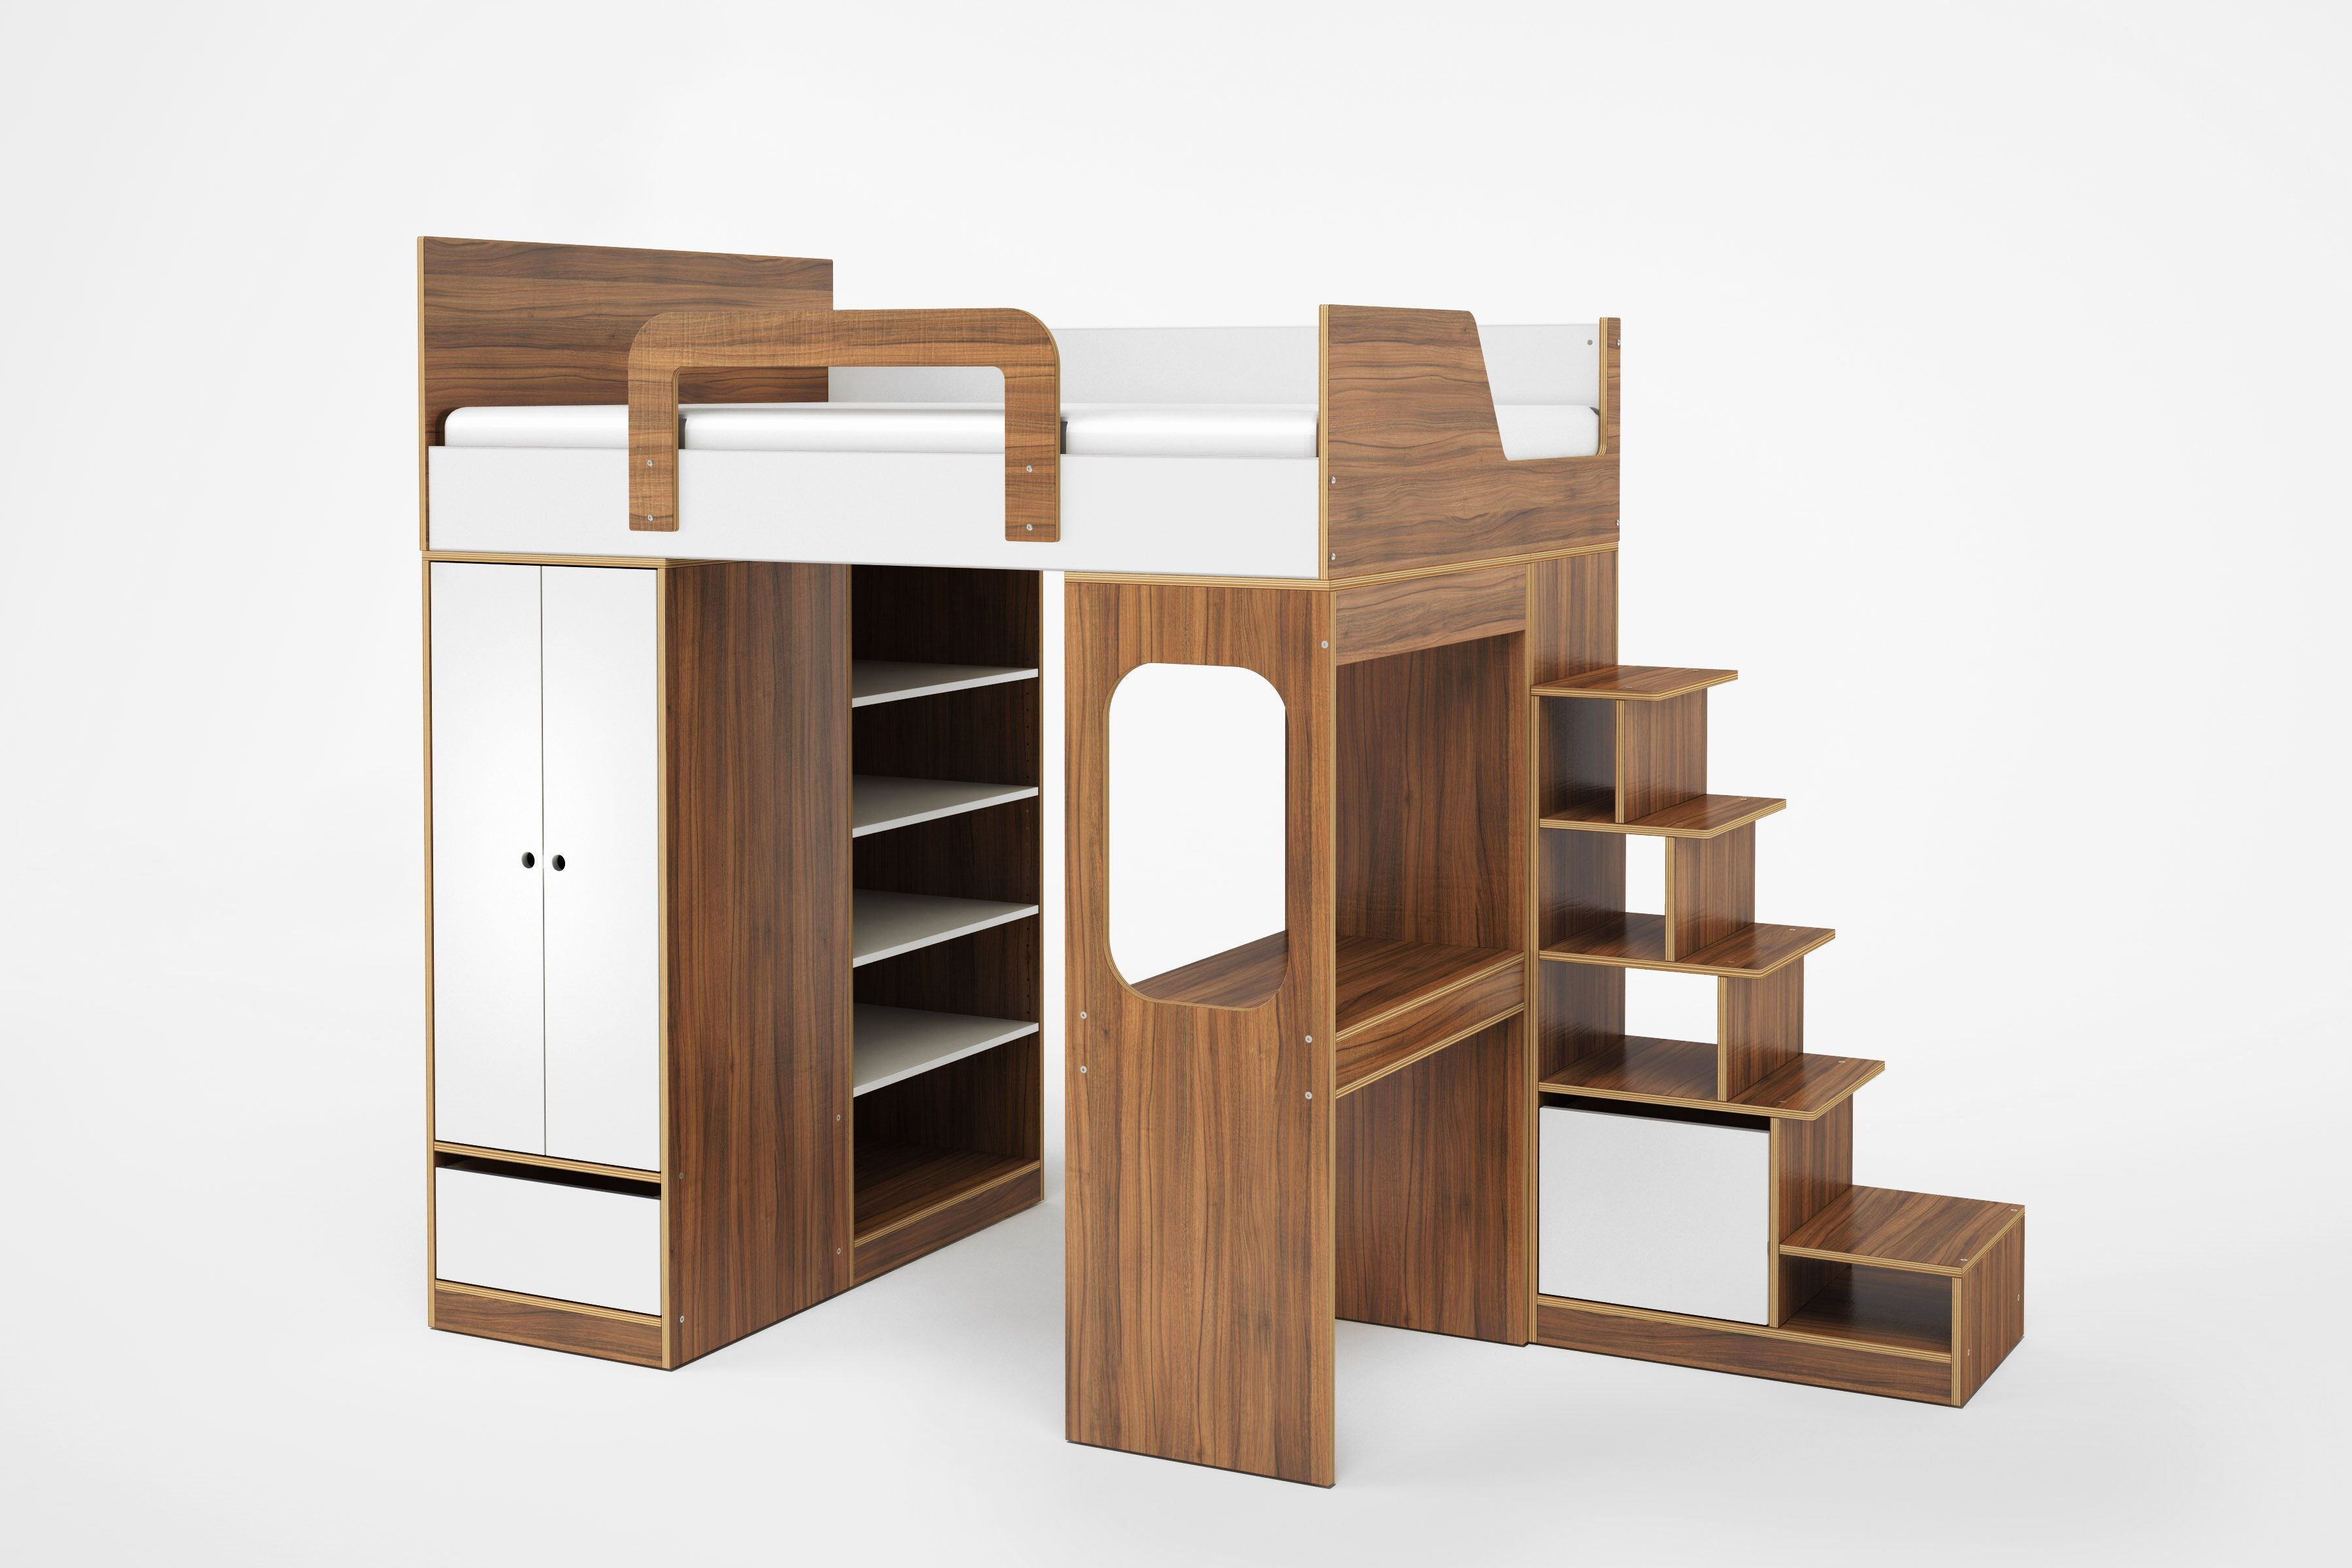 Wooden loft bed with stairs, shelves, wardrobe, on white background.